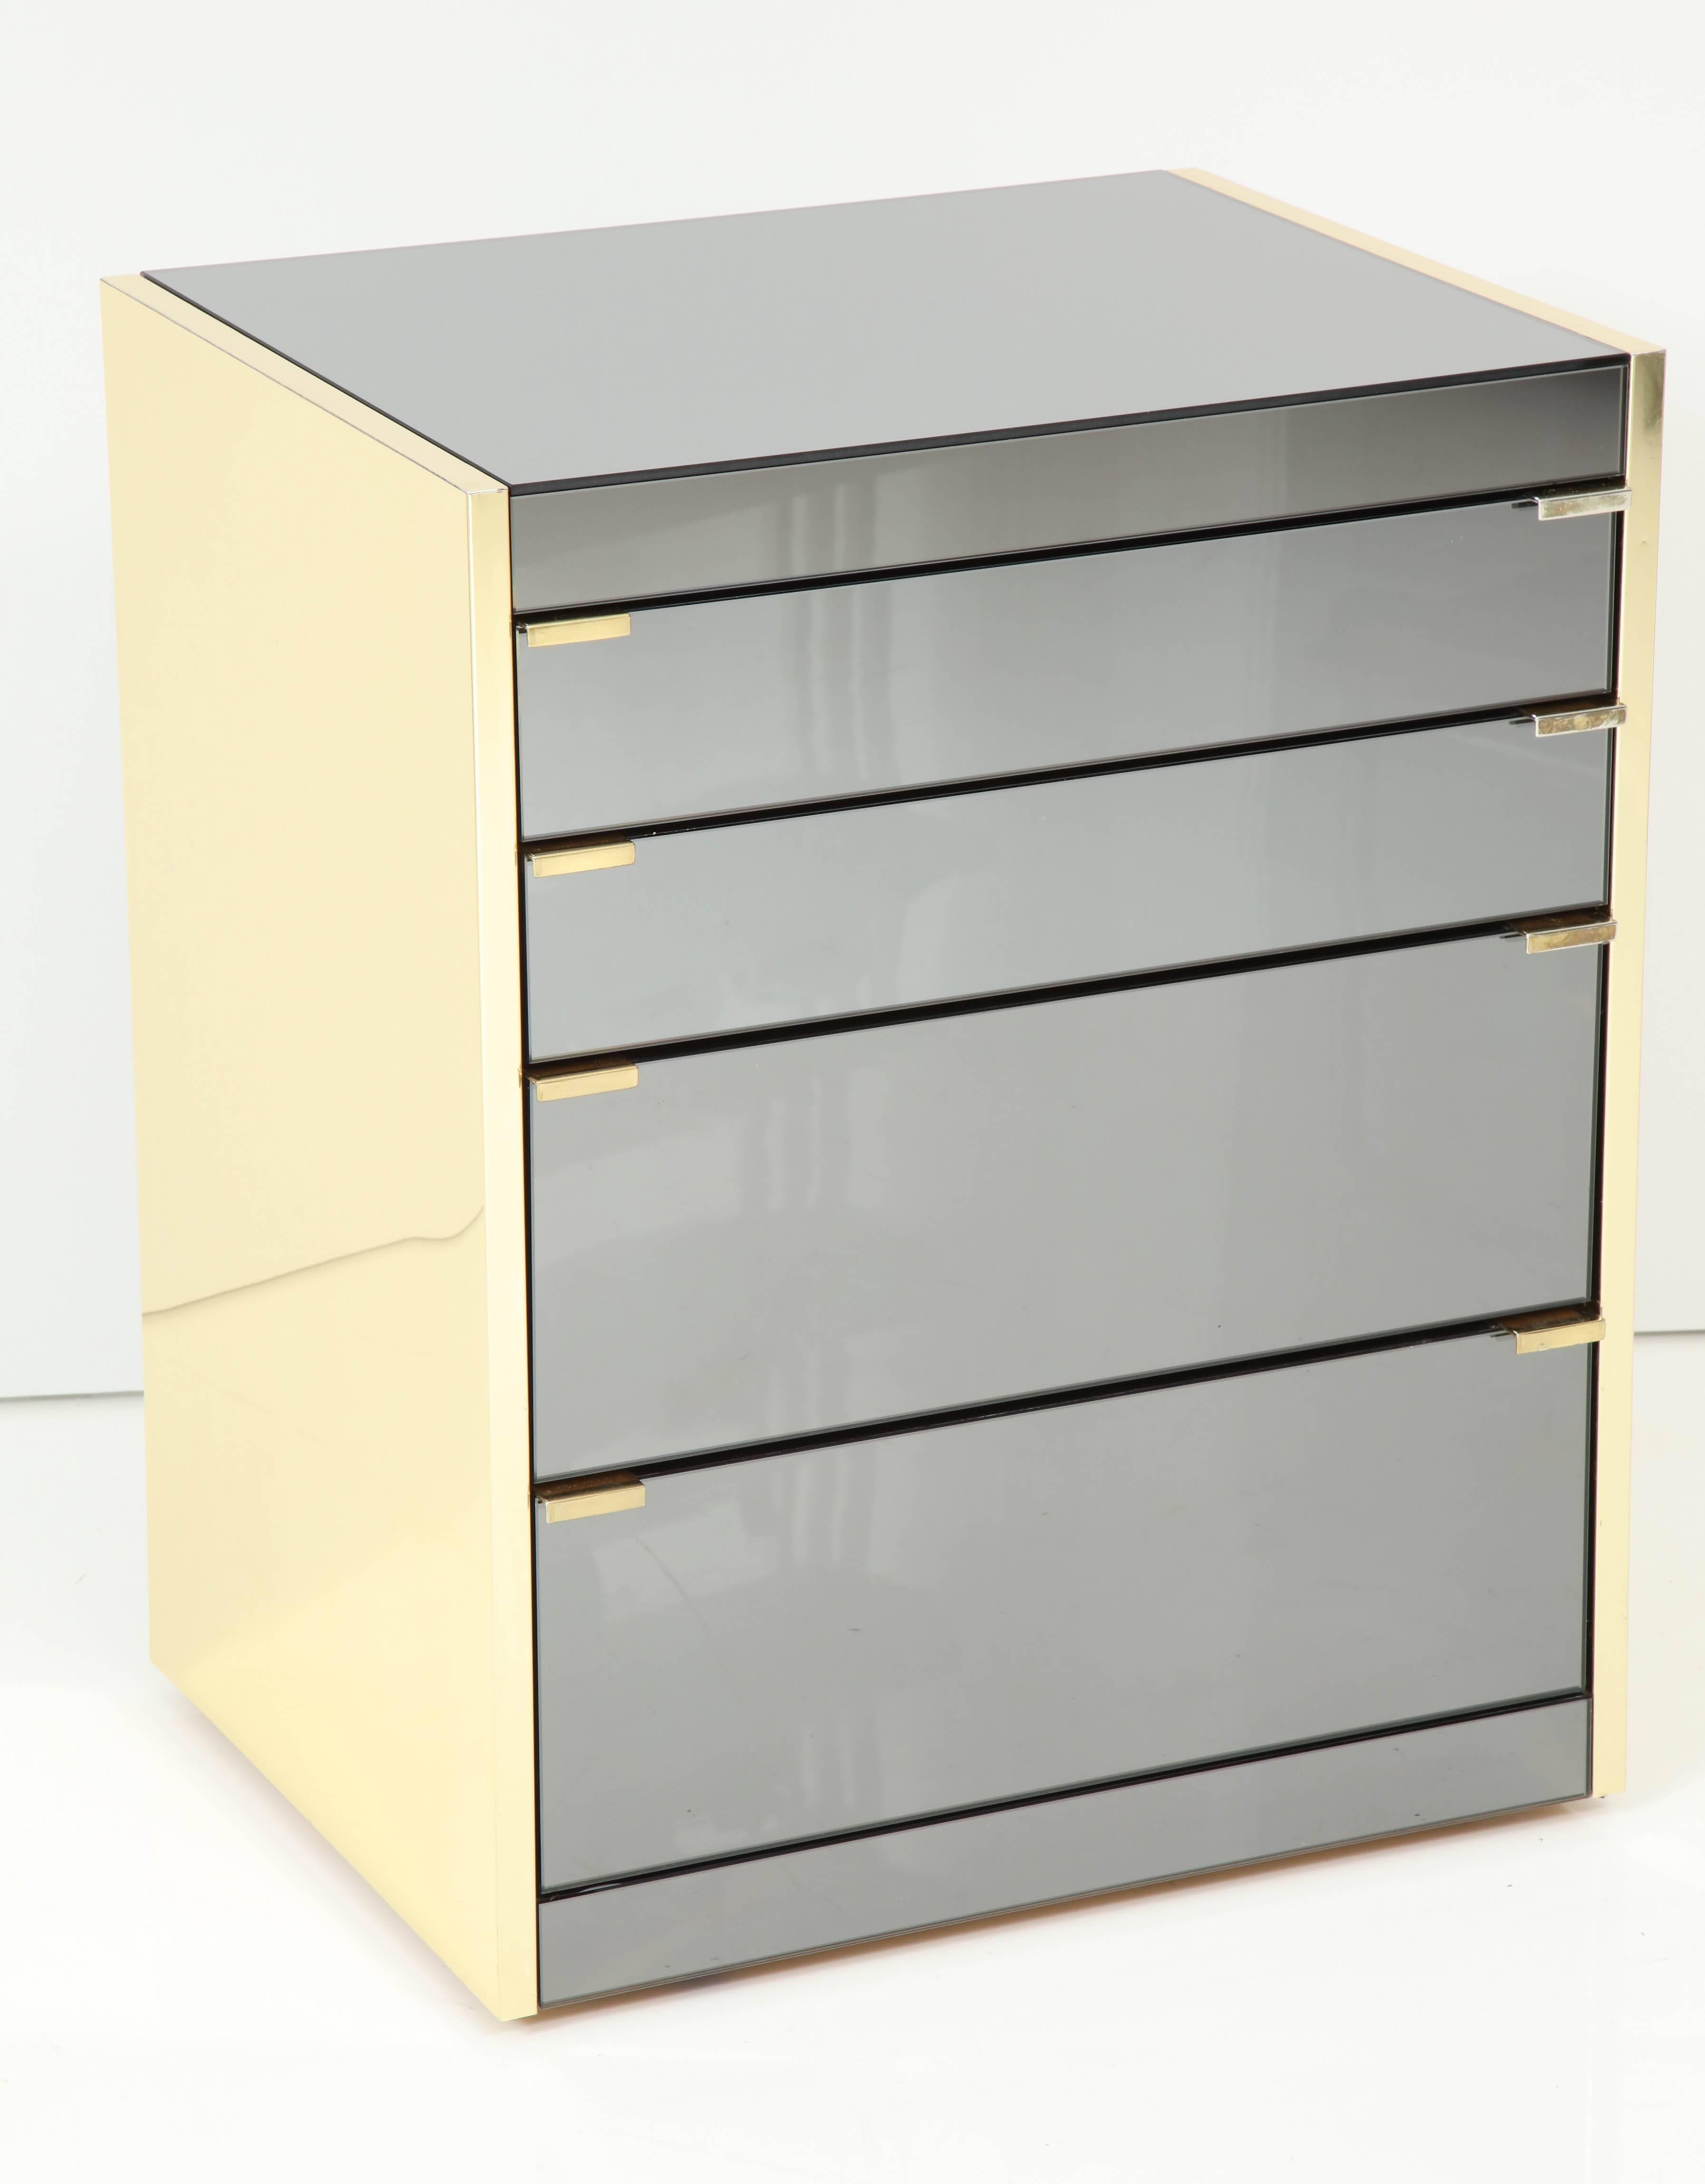 Beautiful pair of Chic cabinets by Ello Furniture company.
Both cabinets top surfaces and four drawers are in a gray mirrored glass and the sides of the cabinets are clad in polished brass.
The brass trim has a few minor scratches consistent with